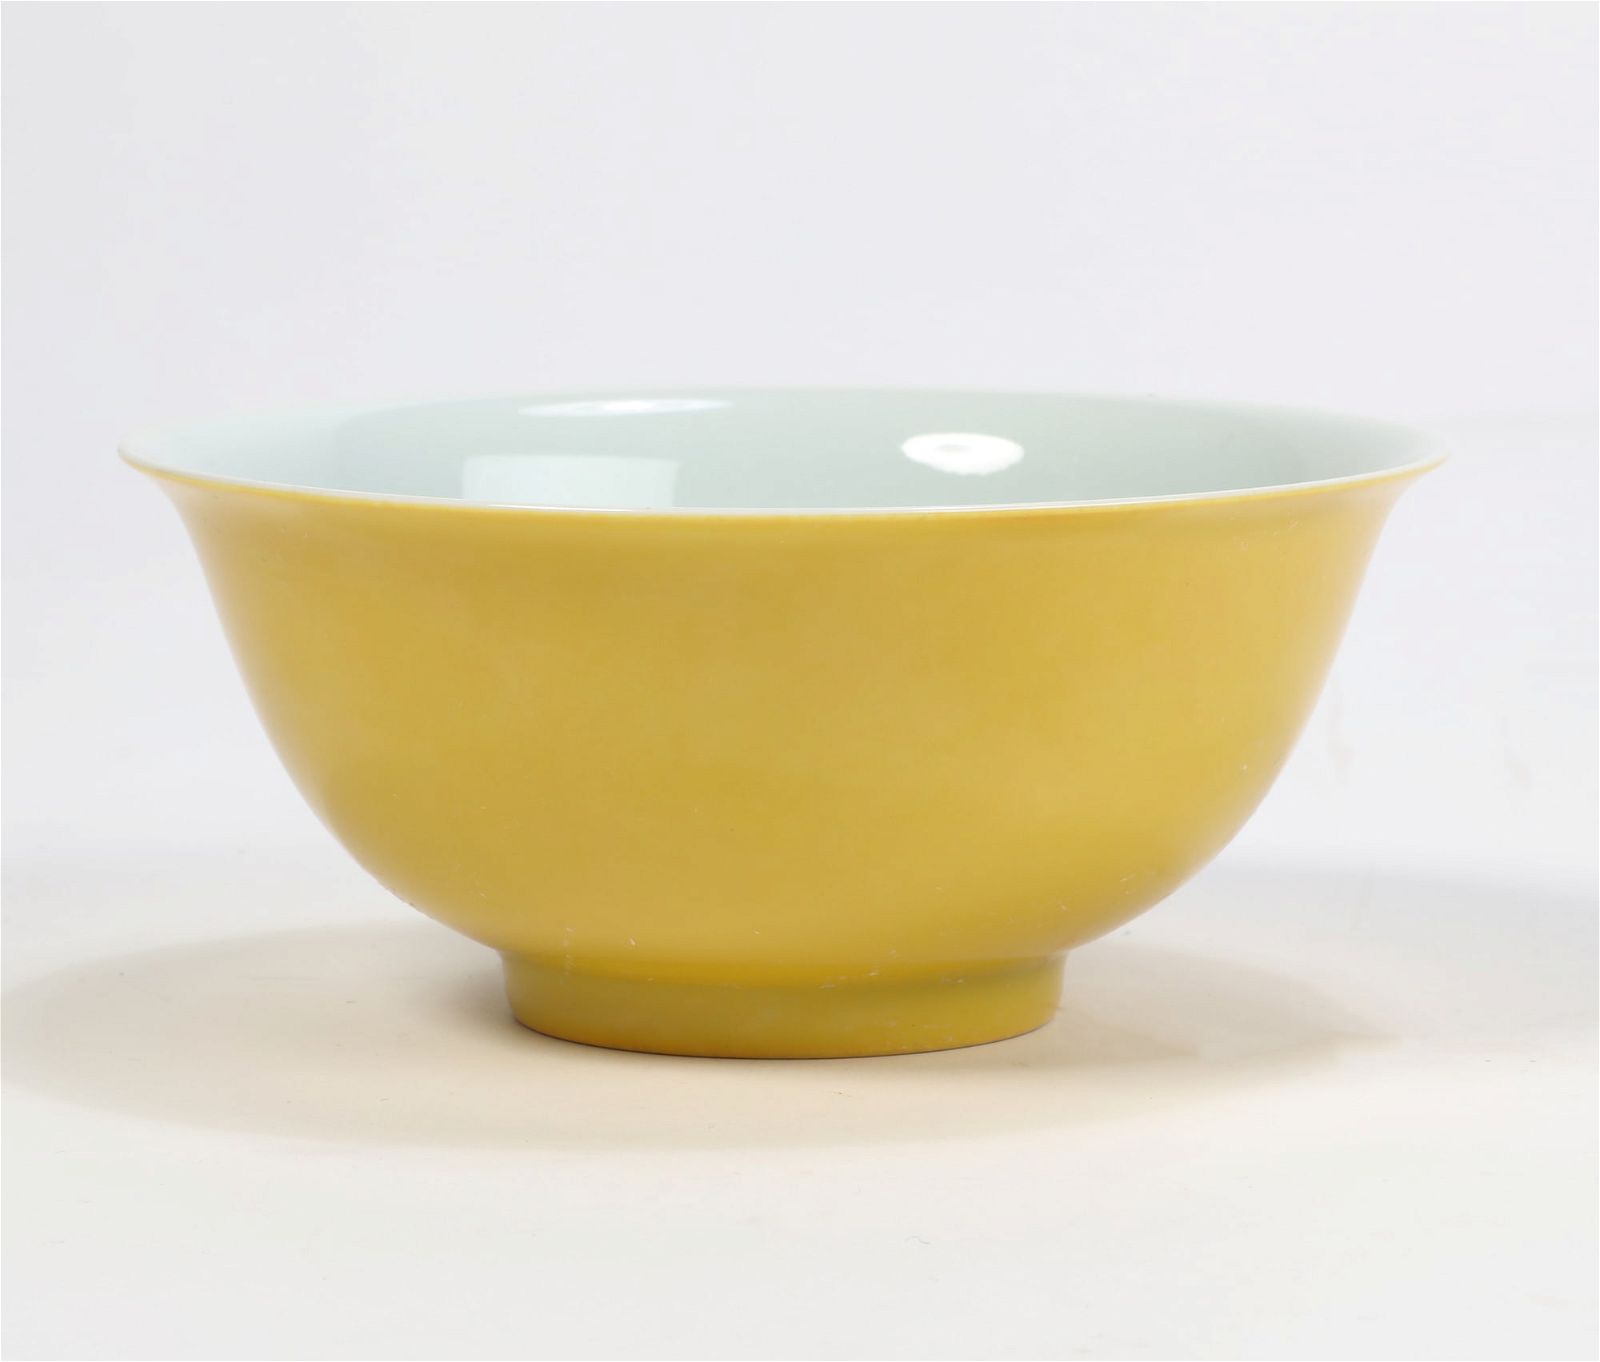 A CHINESE YELLOW GLAZED PORCELAIN 2fb2f4a